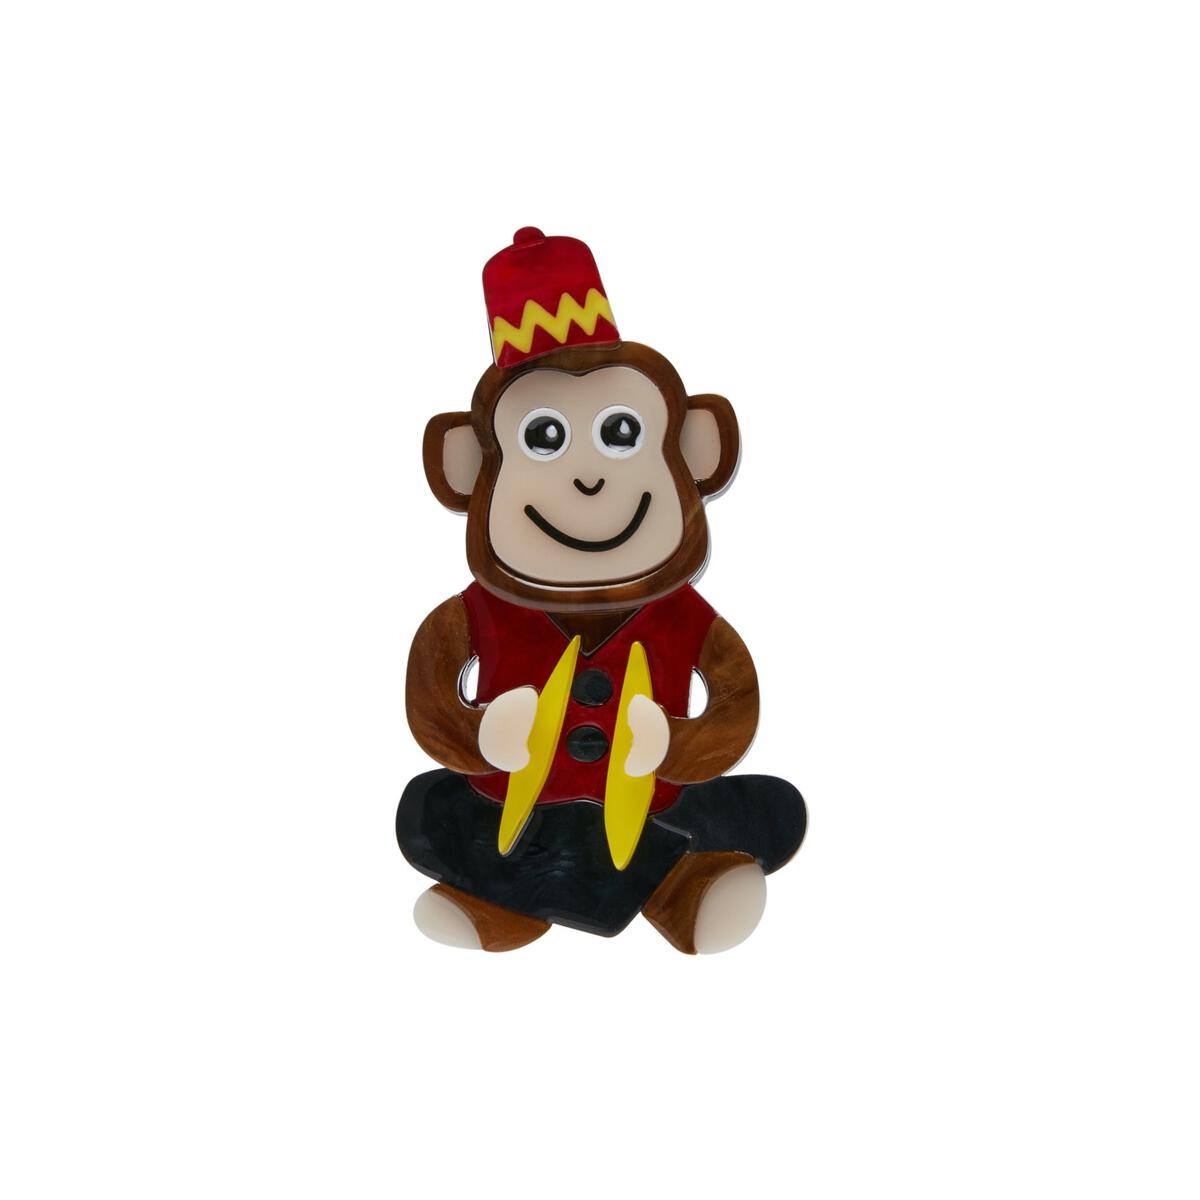 toy seated brown chimpanzee with cymbals wearing red fez and vest 2 1/4" layered resin brooch